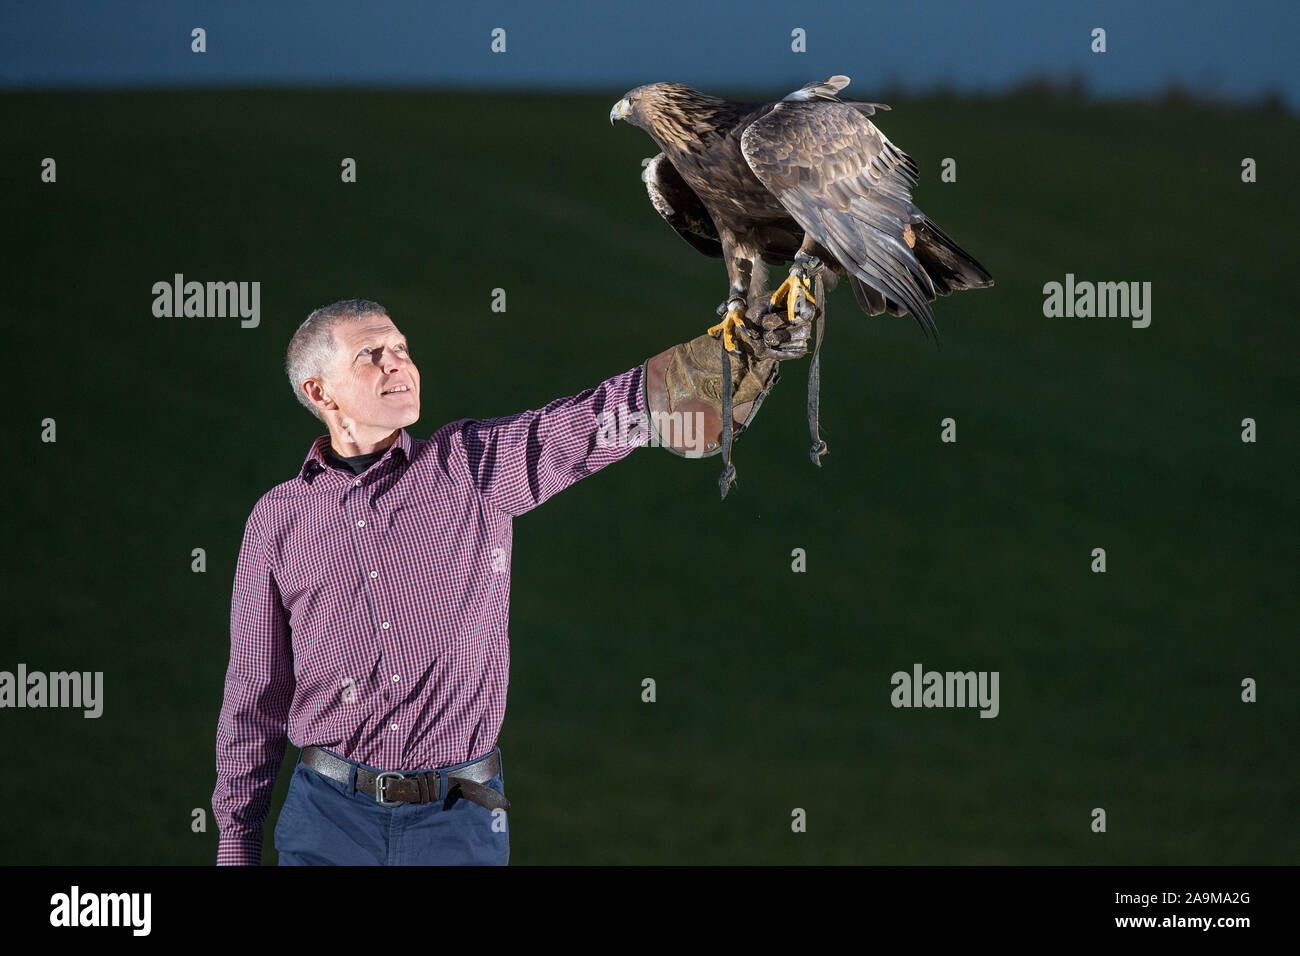 Glasgow, UK. 16 November 2019.   Pictured: Willie Rennie MSP - Leader of the Scottish Liberal Democrat Party.  Scottish Liberal Democrat Leader Willie Rennie visits the Falconry centre in Cluny to highlight the threat Brexit poses on the environment and biodiversity loss. Credit: Colin Fisher/Alamy Live News Stock Photo